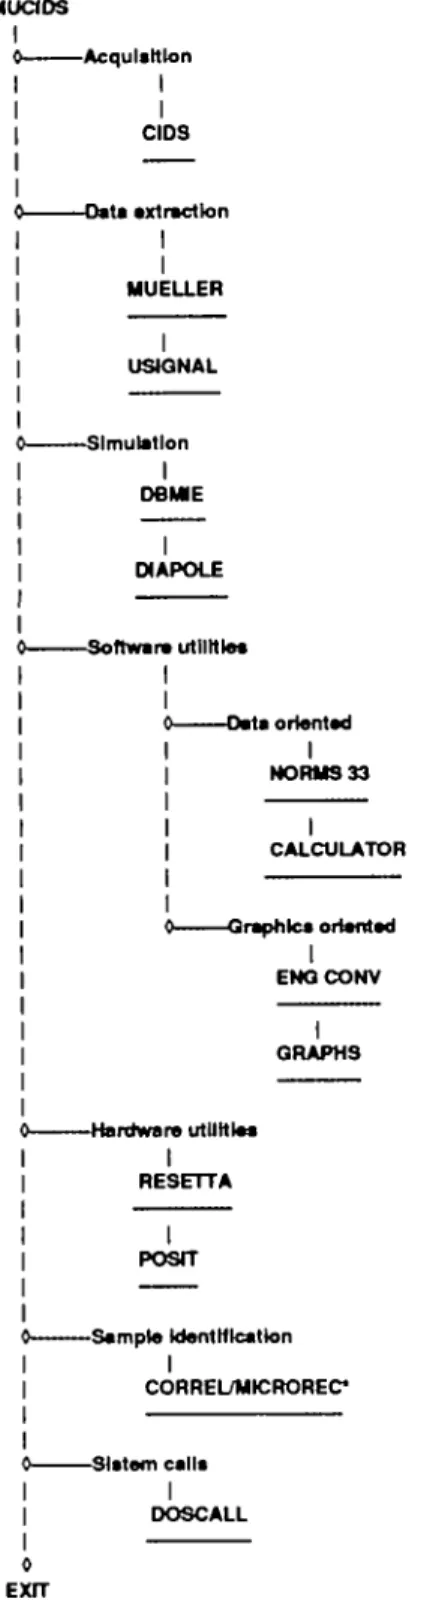 Fig. 2. Summary of the software activities managed by MUCIDS.